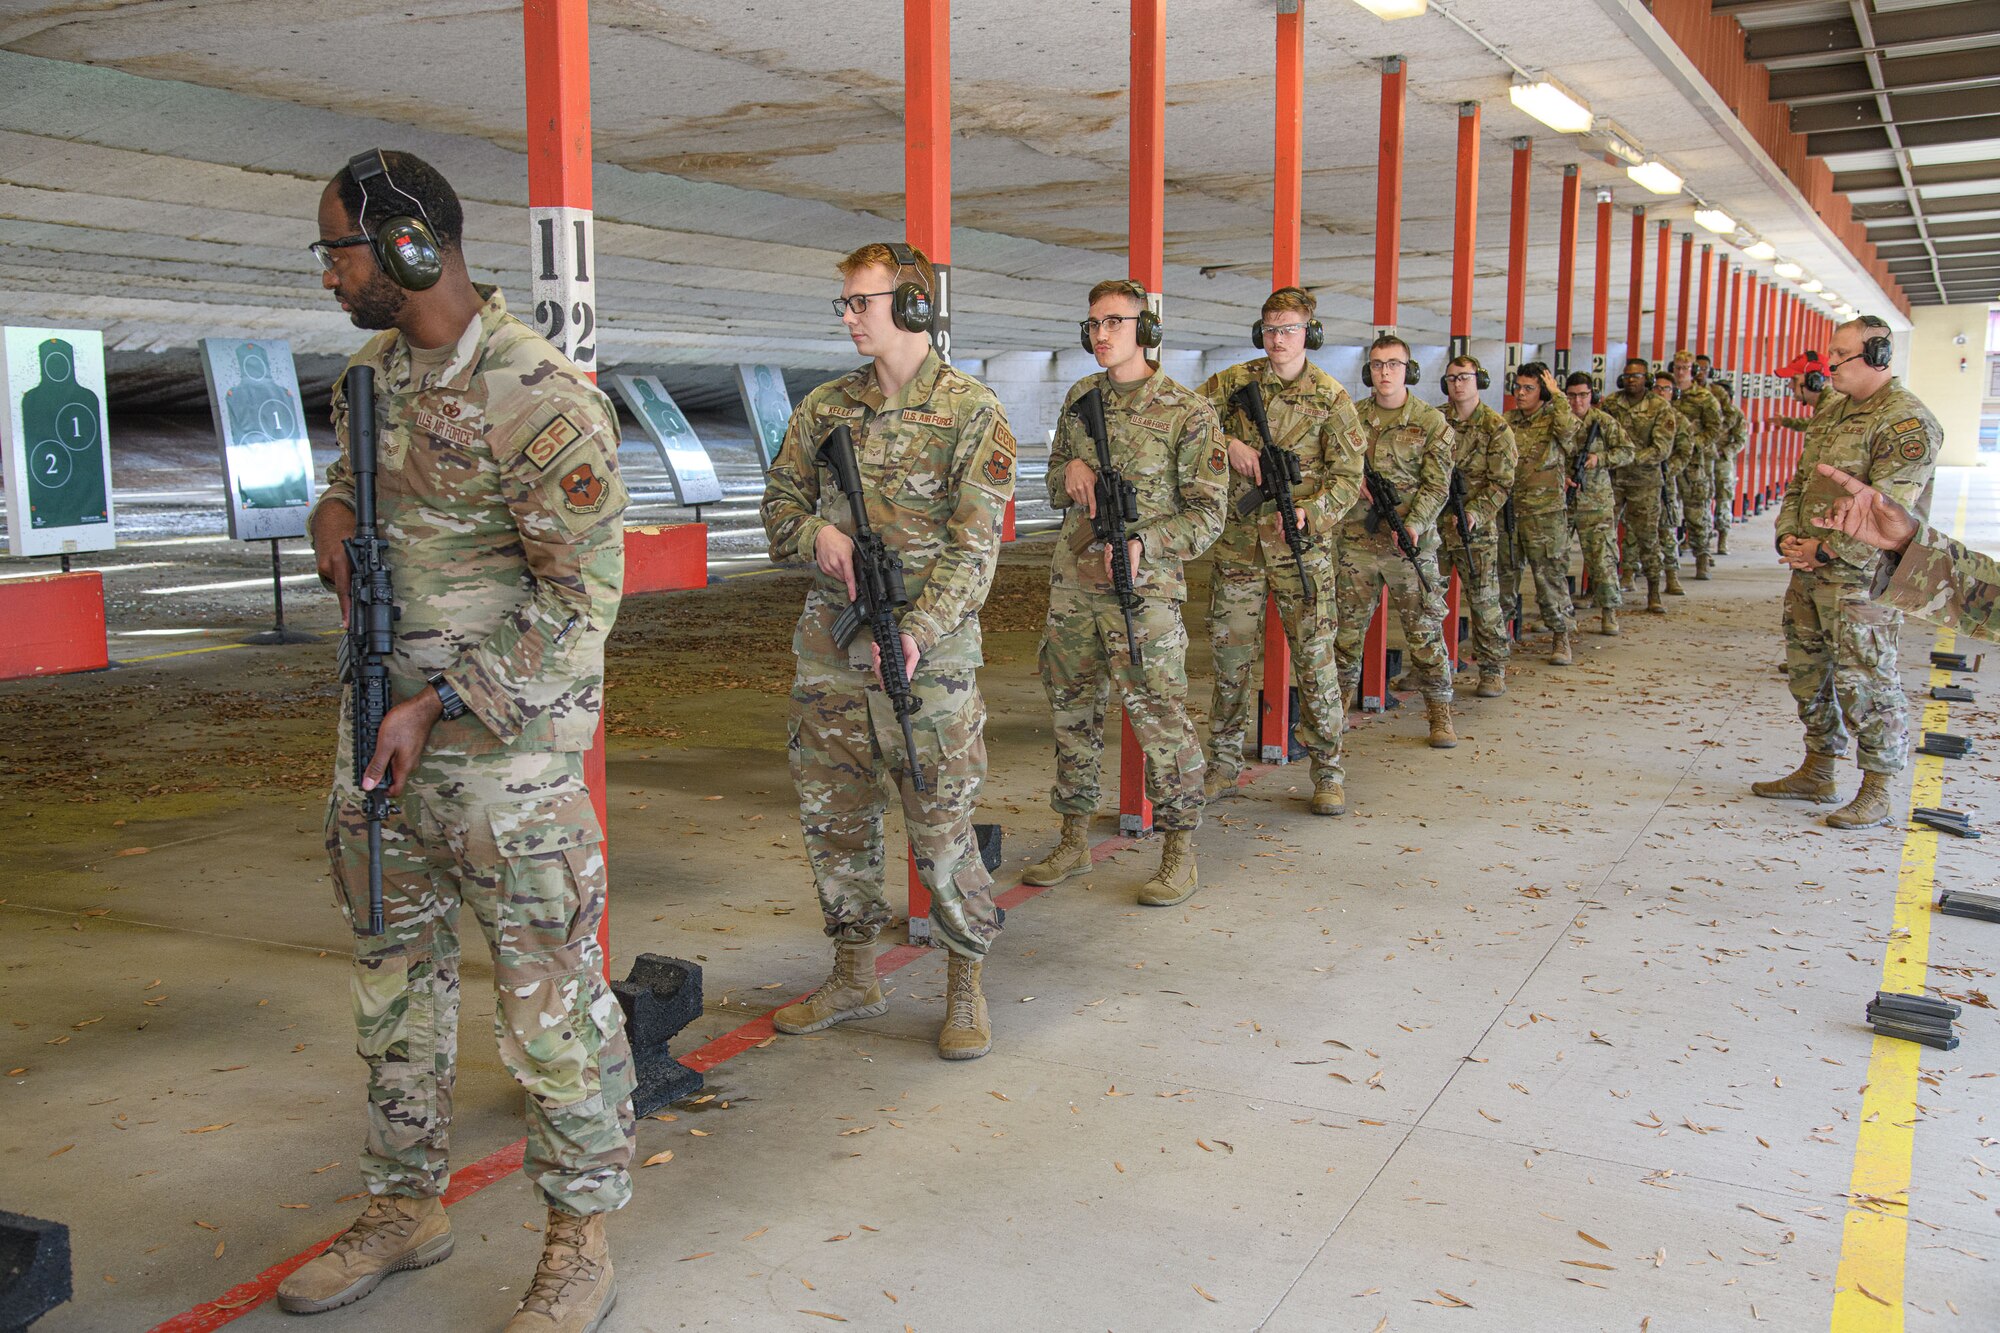 Airmen prepare to practice their weapons training at Maxwell Air Force Base, December 6, 2022. The Airmen gathered in a field training area where, after being given a specific scenario, they operated as a team, responded to threats, and accomplished the mission.